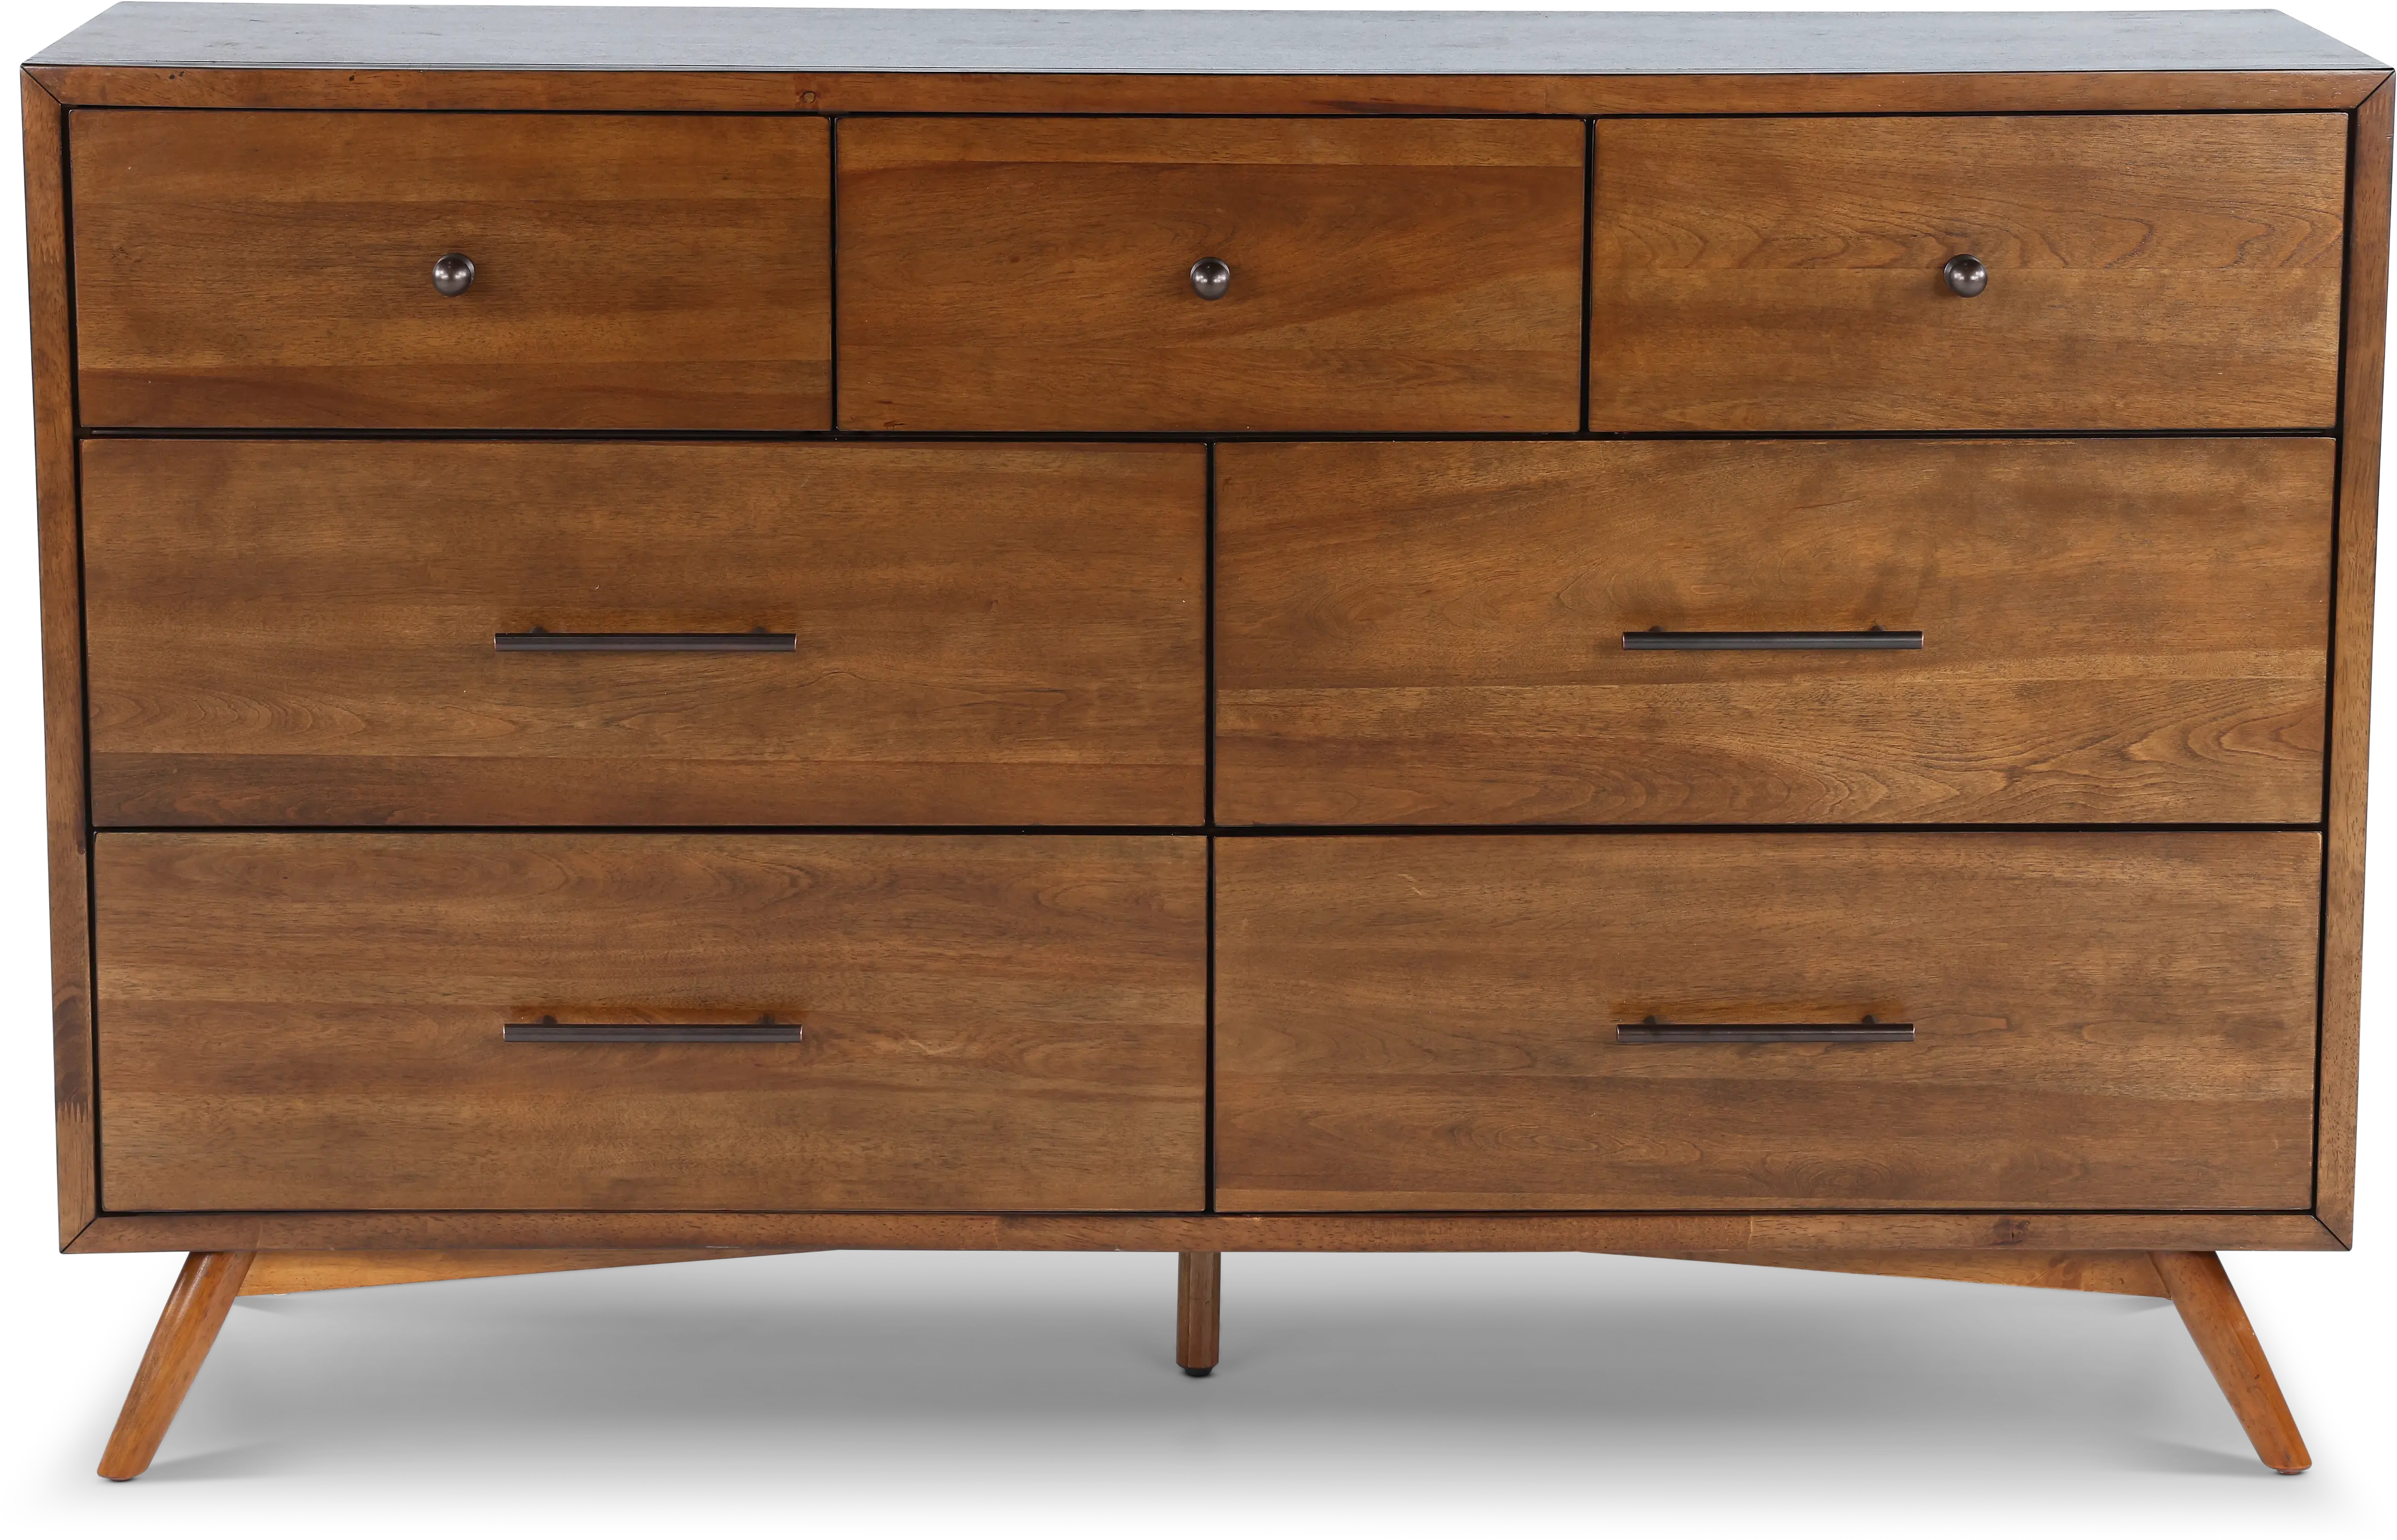 https://static.rcwilley.com/products/112388884/Robin-Mid-Century-Modern-Brown-Dresser-rcwilley-image1.webp